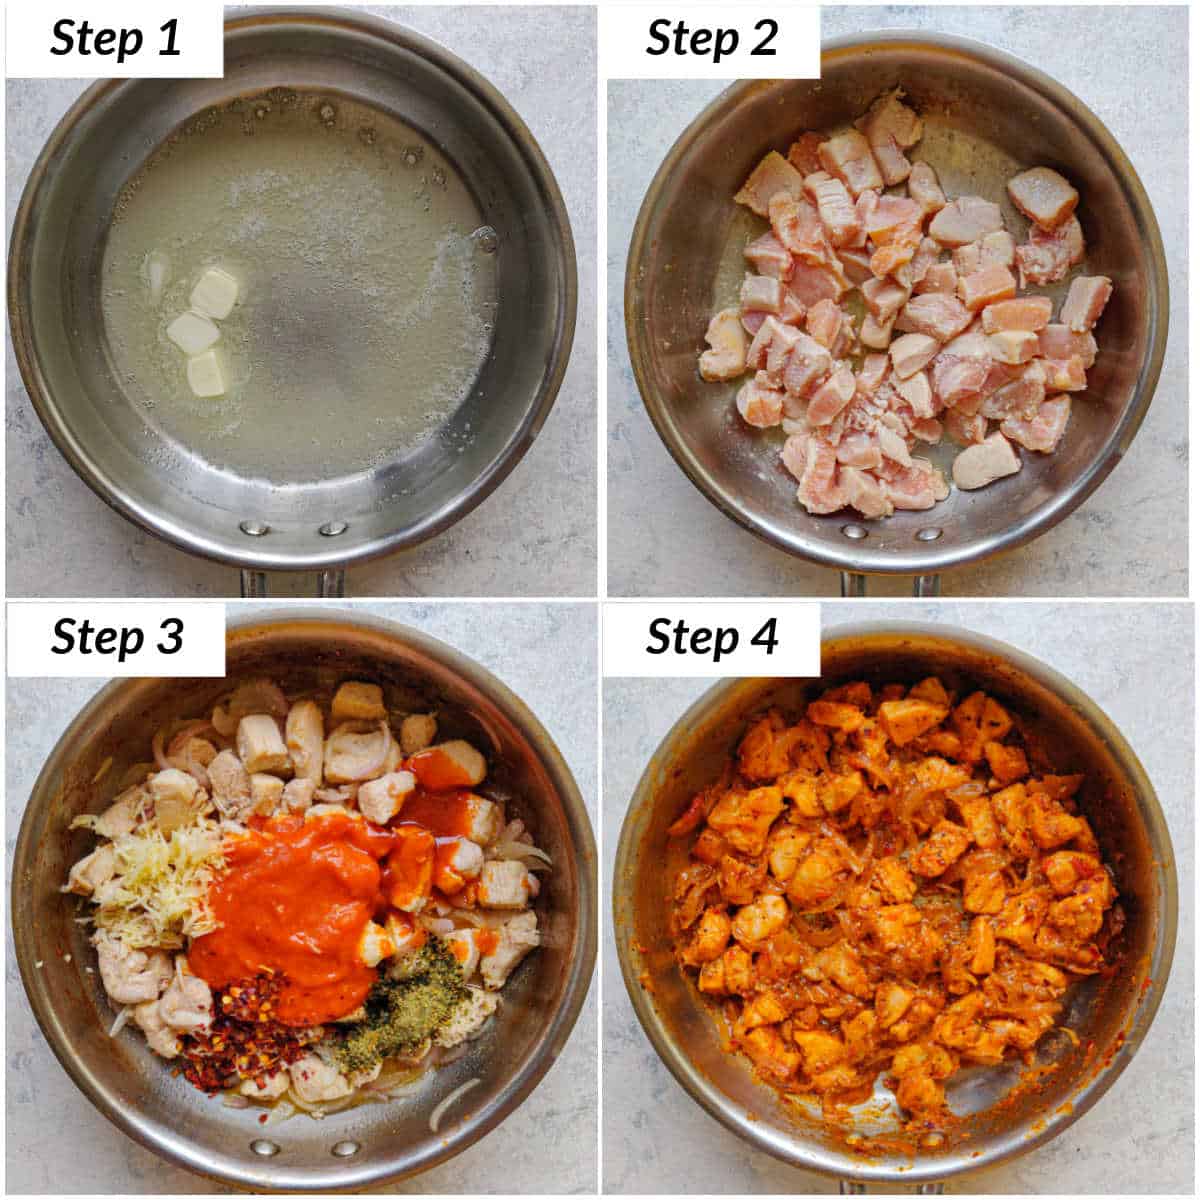 image collage showing the steps for making chicken stuffed buns filling.